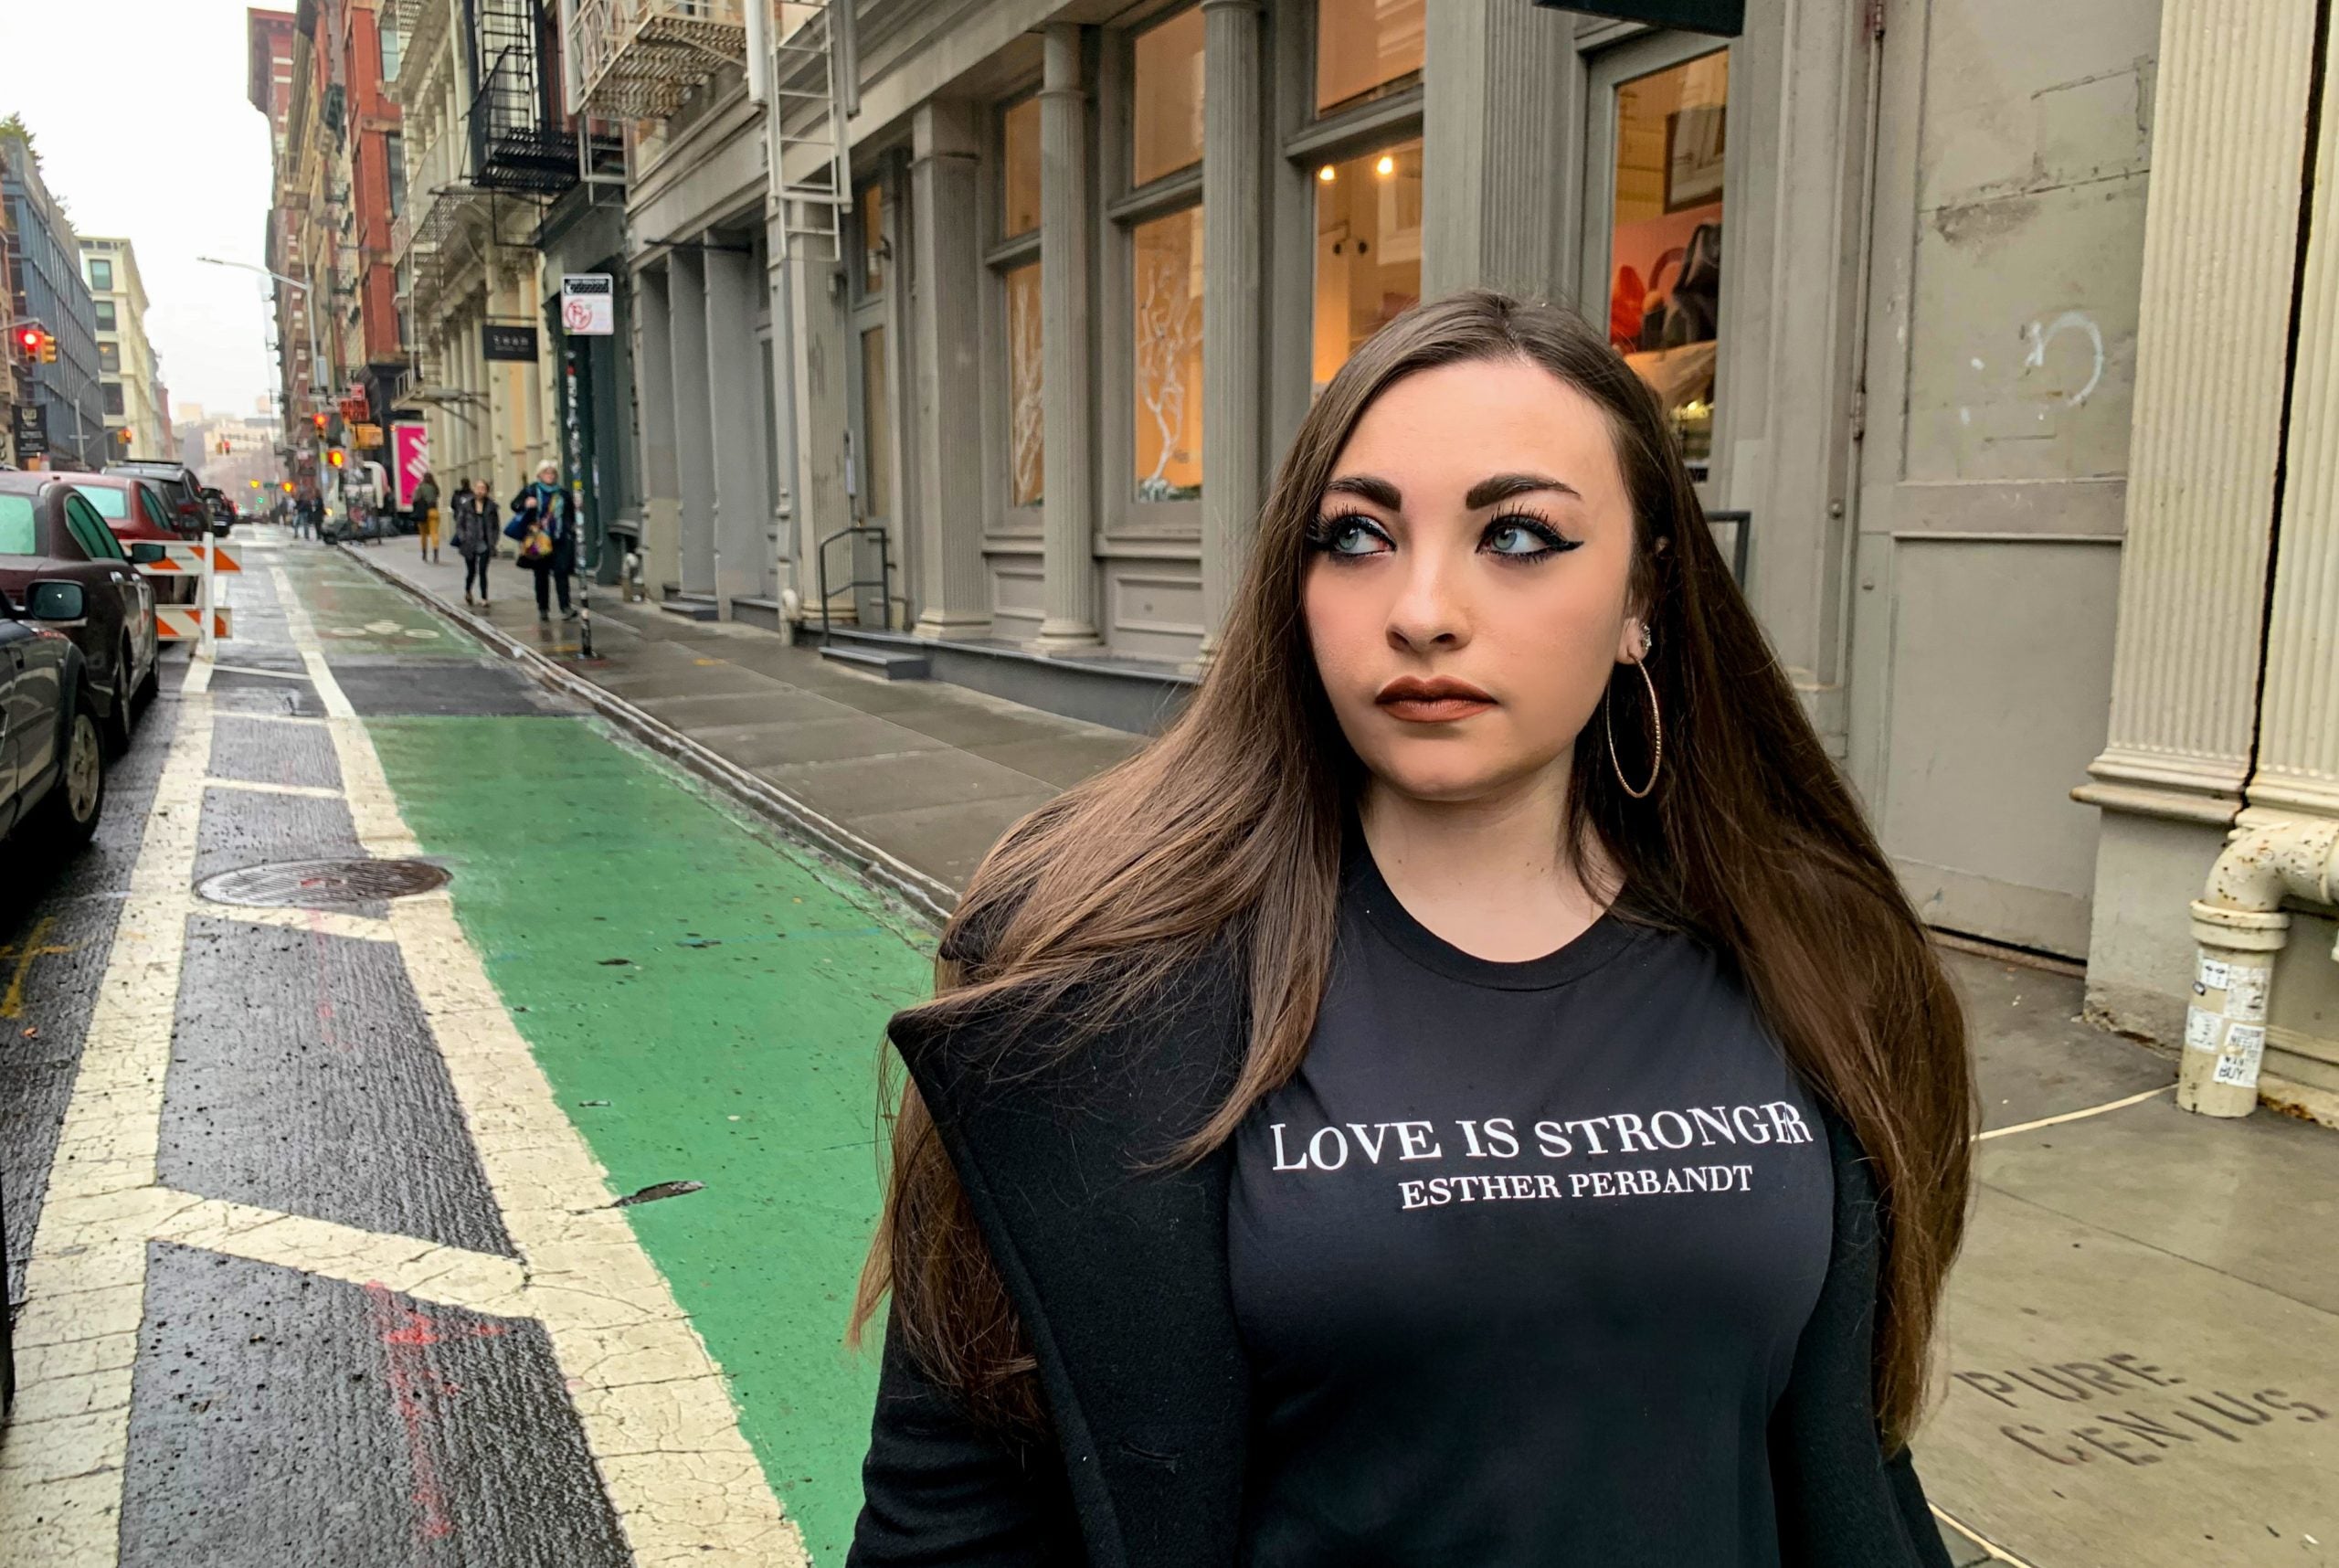 "Love Is Stronger" Women's Black T-shirt - Esther Perbant Collection - Made in Germany - World Chic